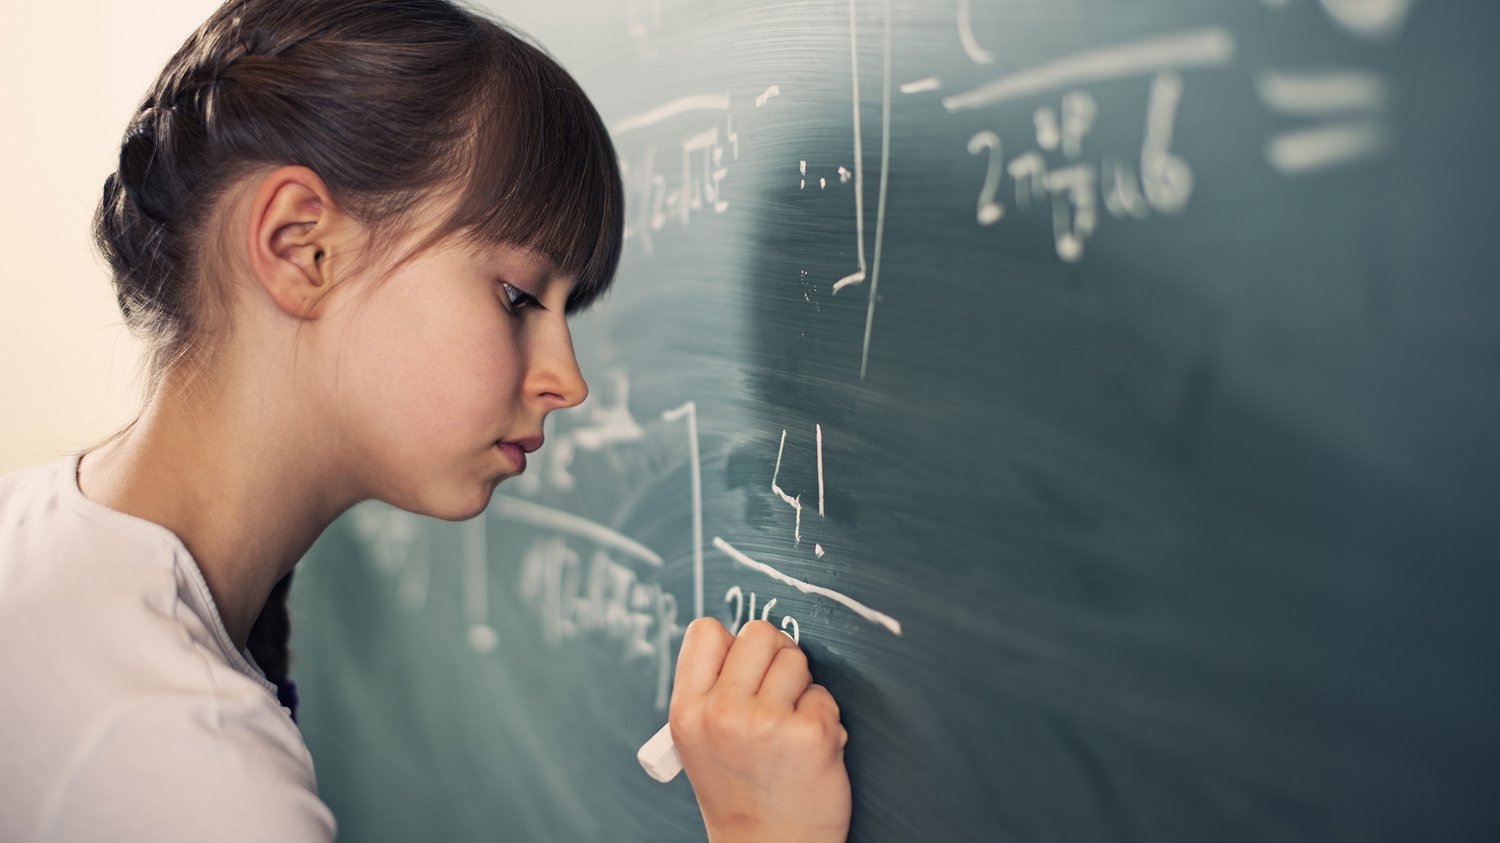 Girls still fall behind boys in top scores for AP math exams